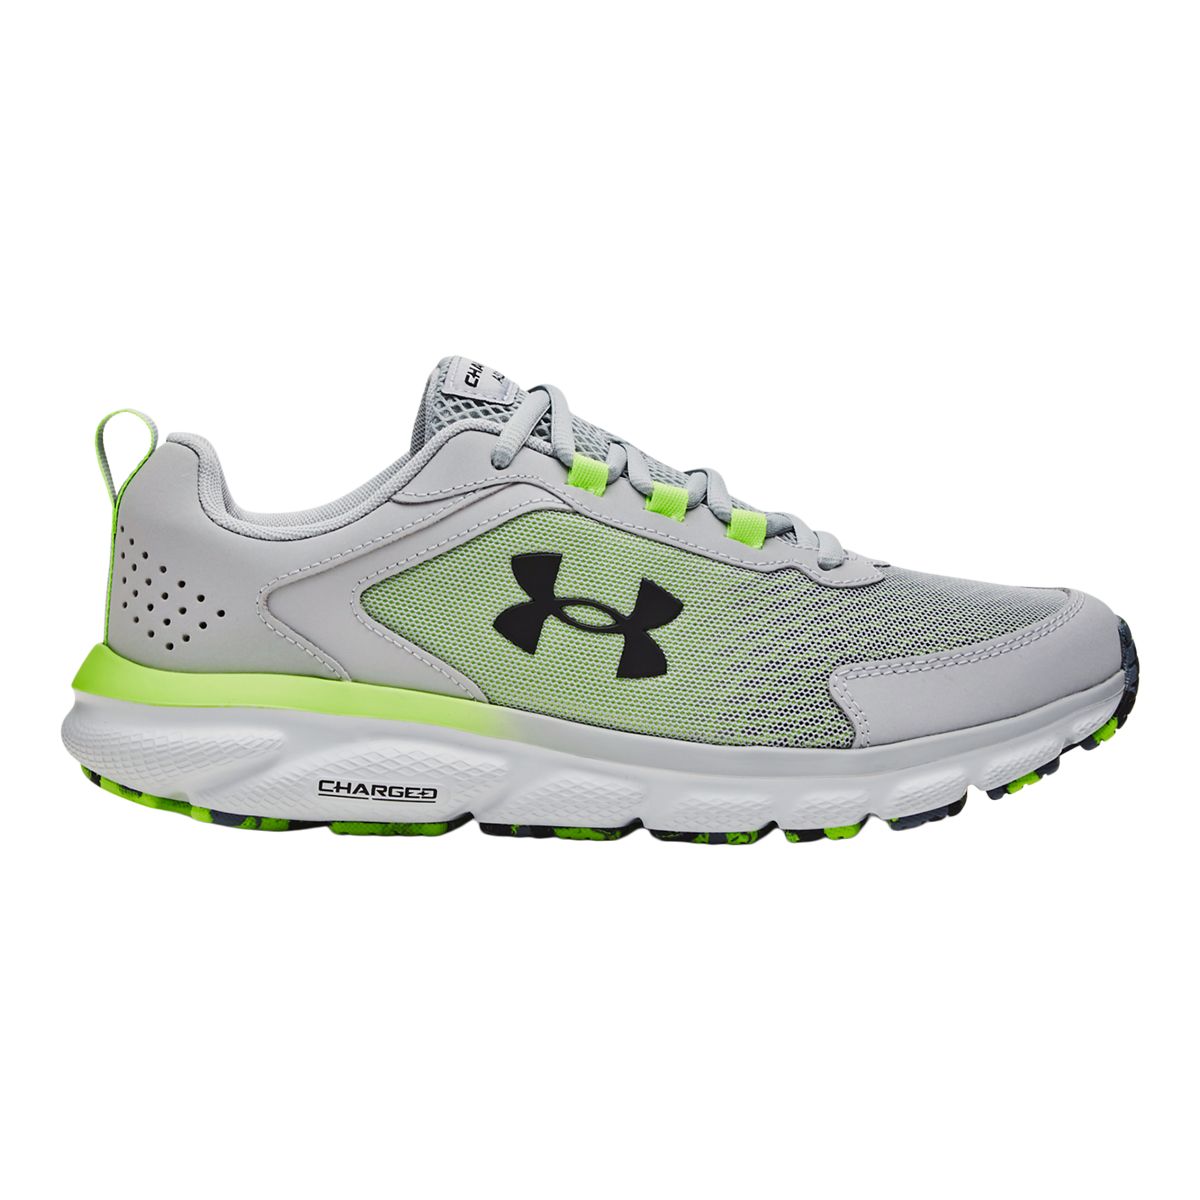 Under Armour Women's Charged Assert 9 Training Shoes, Wide Width,  Lightweight, Leather